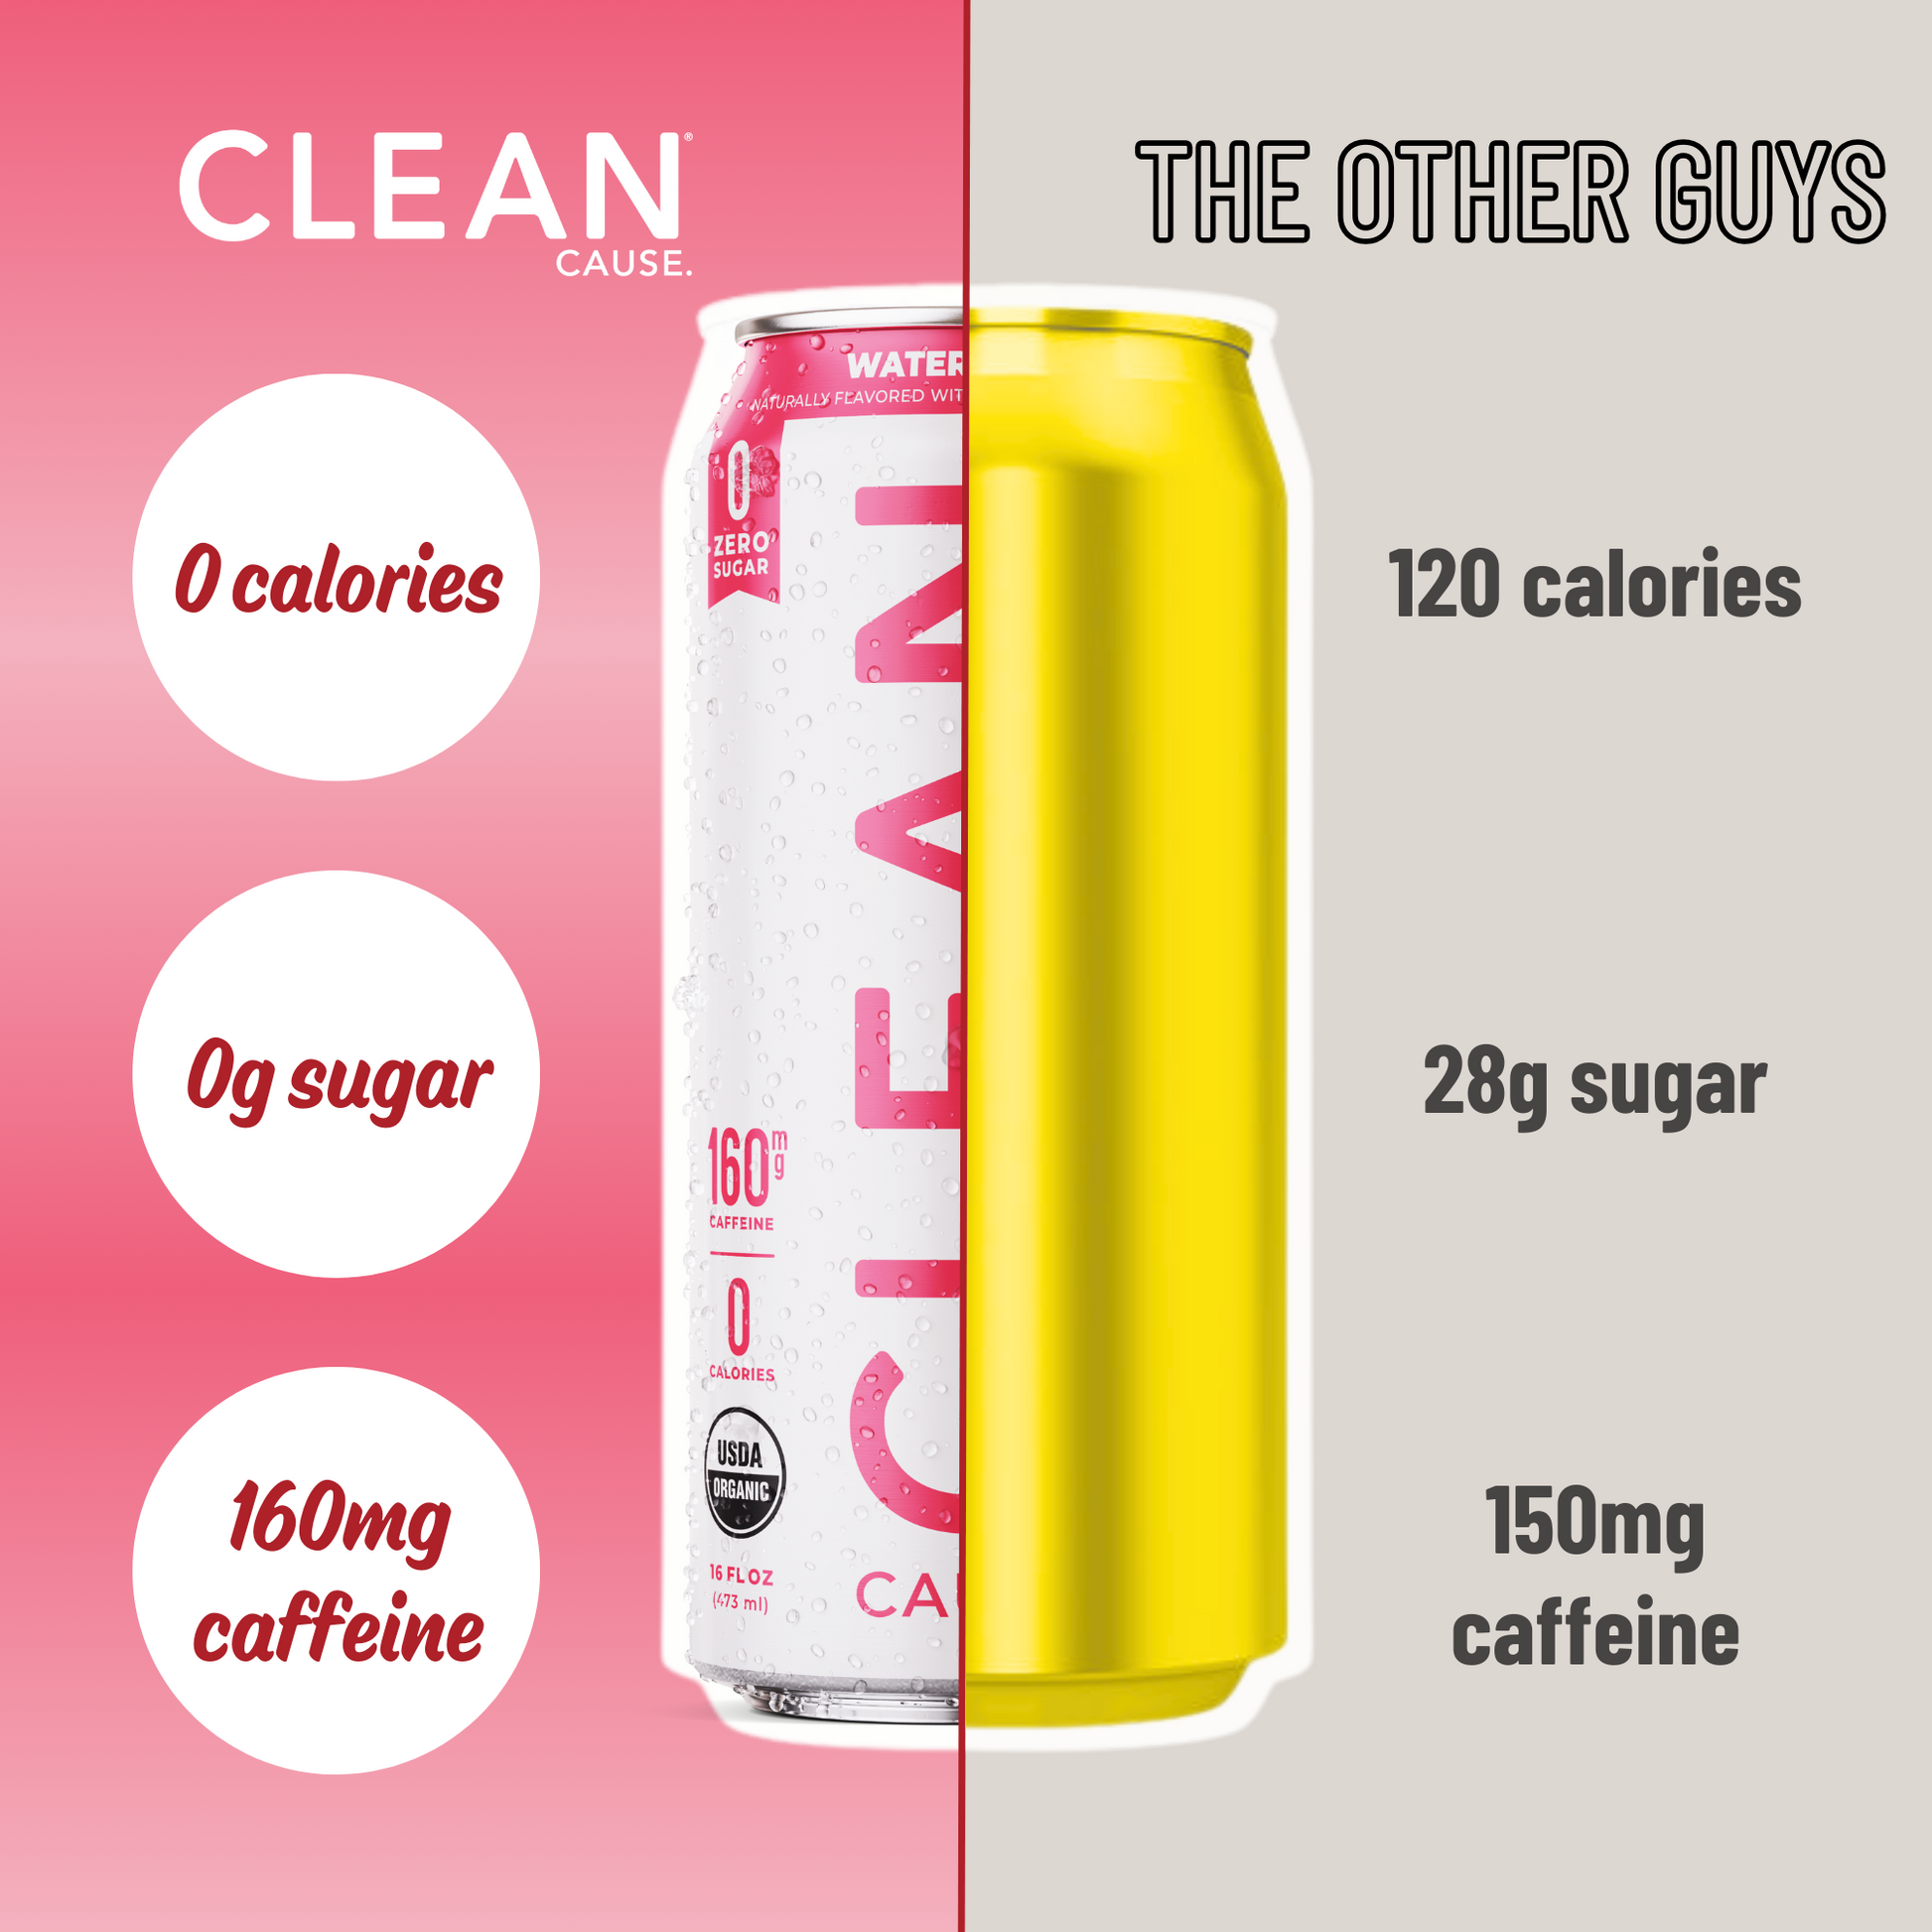 A can split between CLEAN Watermelon Yerba Mate and "The Other Guys" showing CLEAN with 0 calories, 0g sugar, and 160mg caffeine and the other guys with 120 calories, 28g sugar, and 150mg caffeine